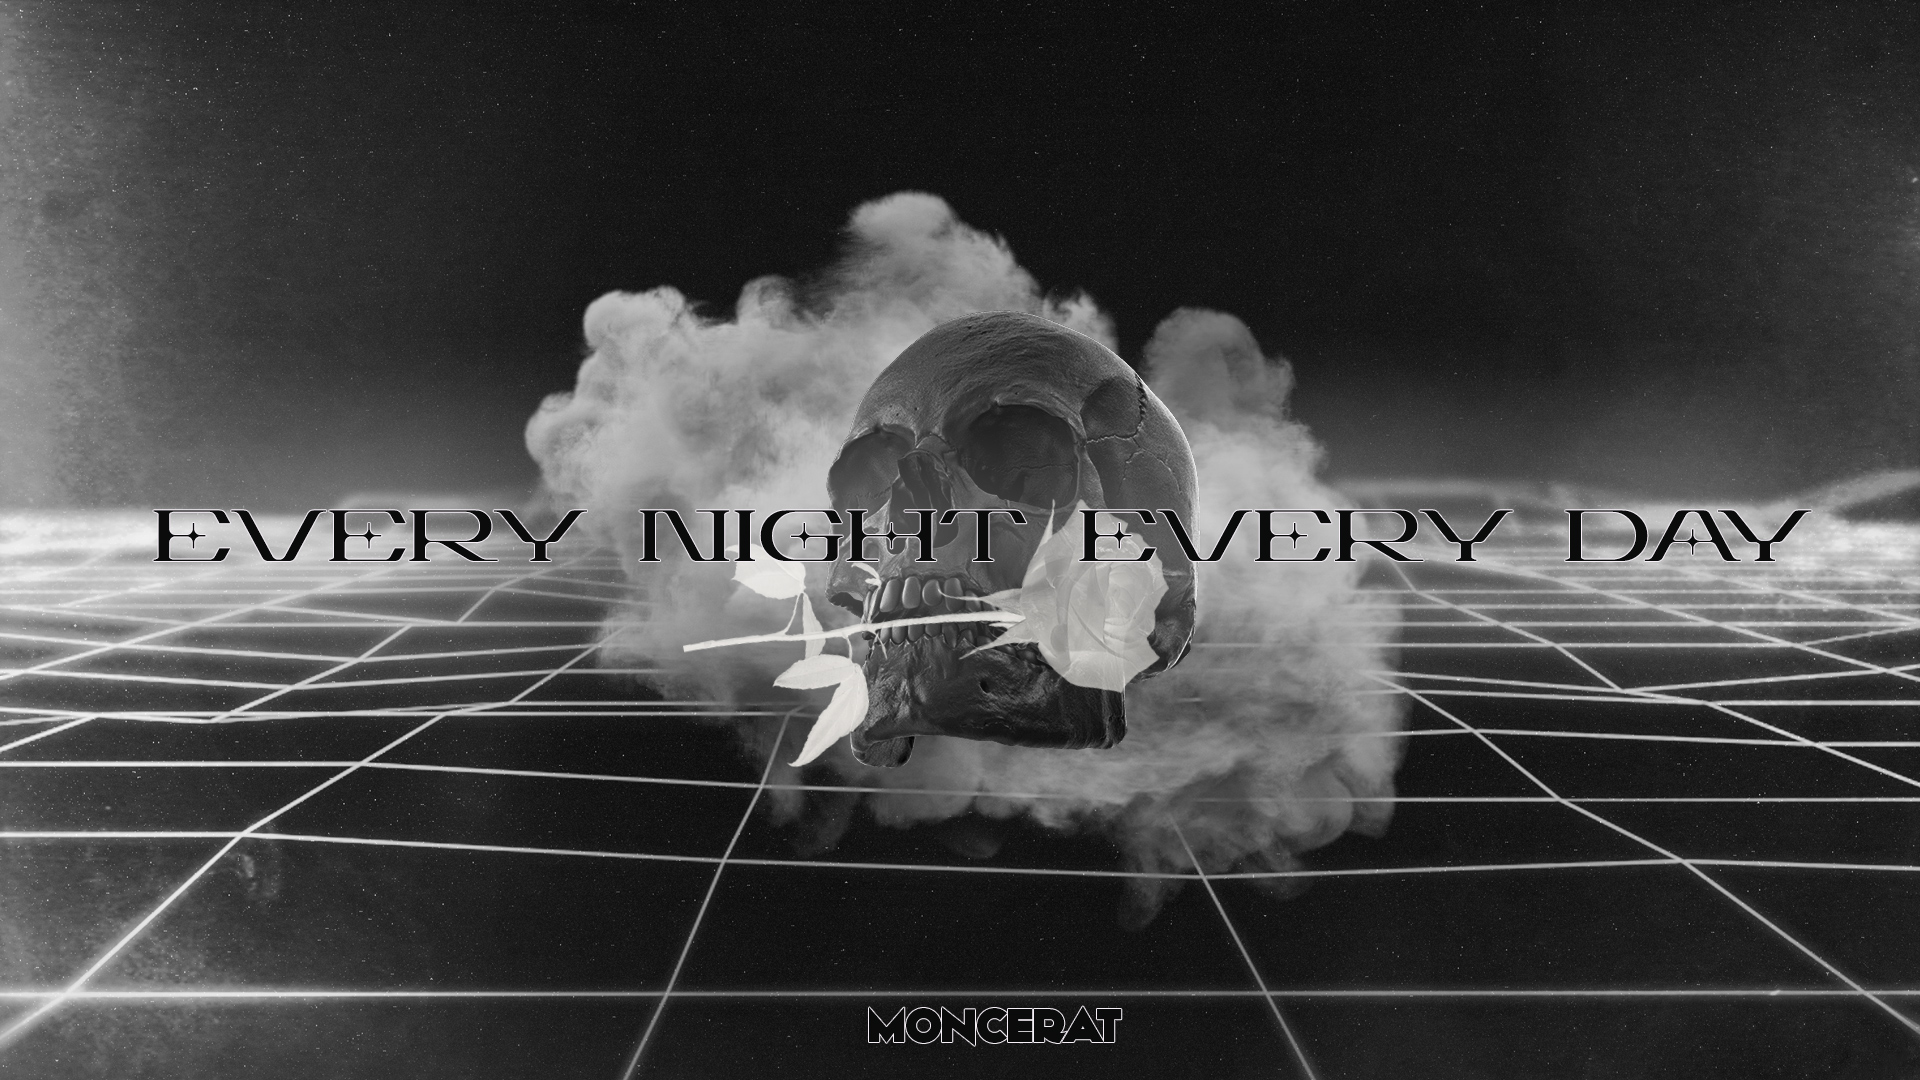 MONCERAT - Every night Every day